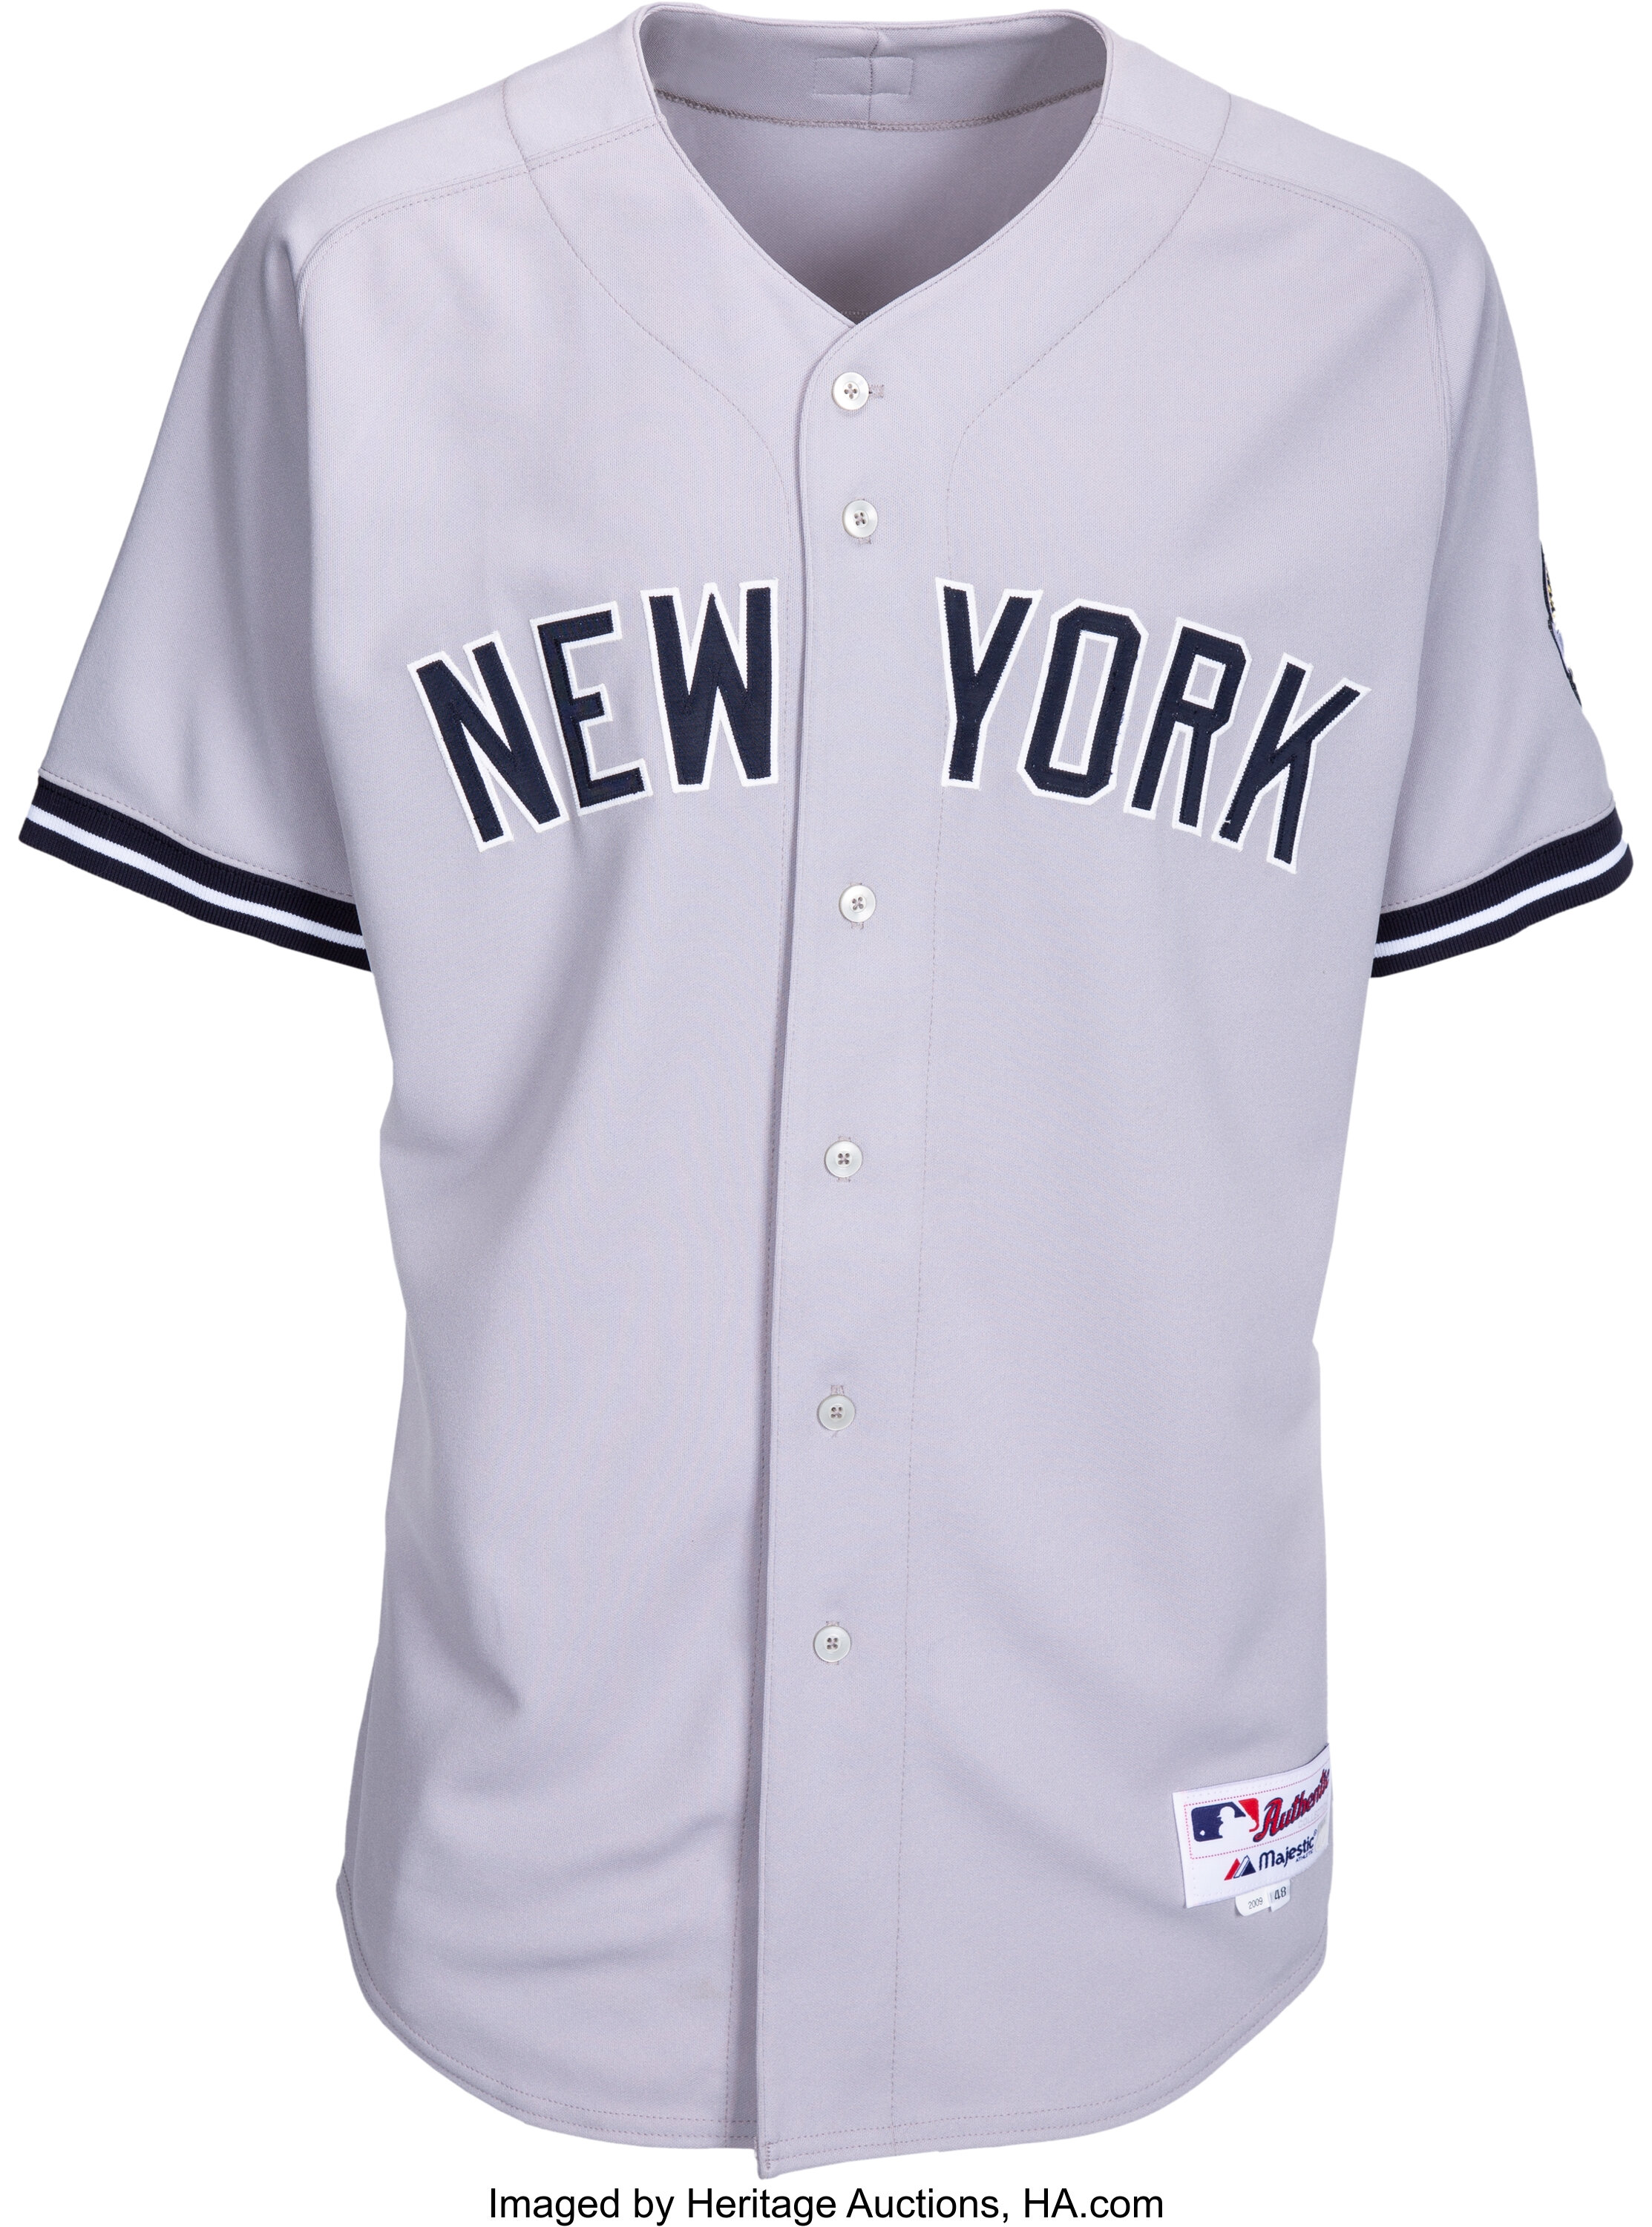 2009 Derek Jeter Game Issued New York Yankees Jersey with